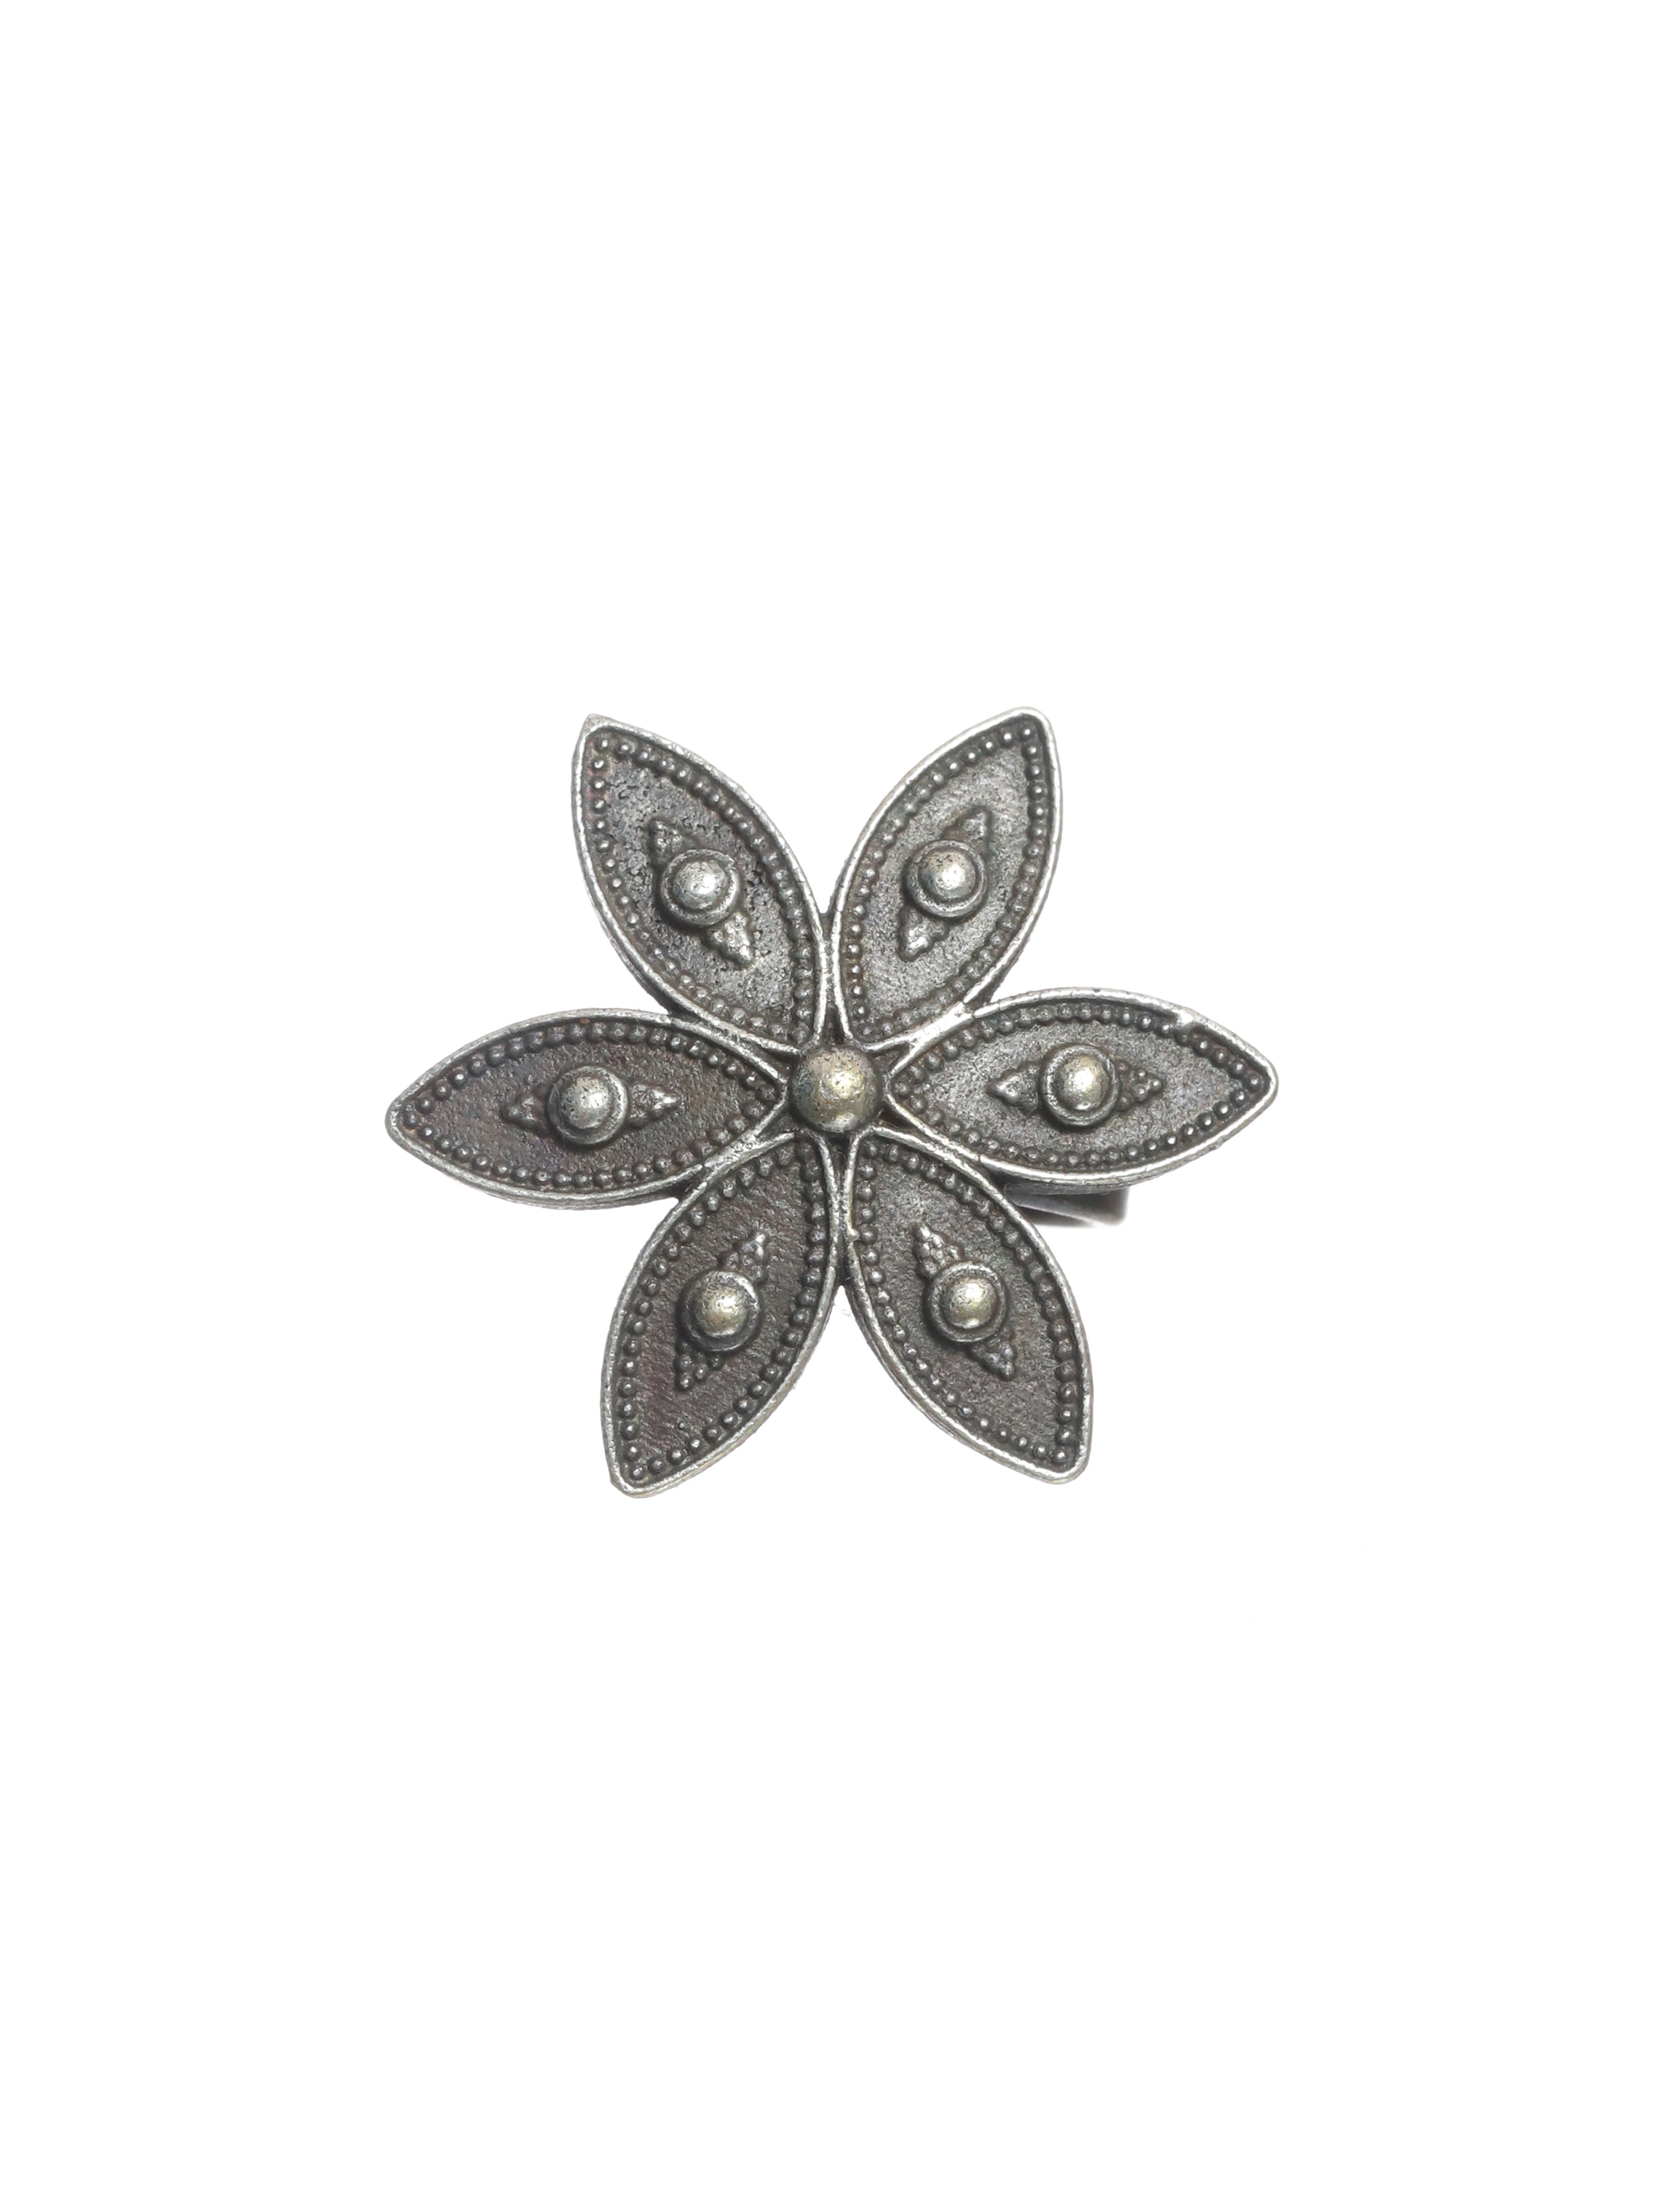 Oxidised Floral-Shaped Silver-Plated Adjustable Finger Ring - Jazzandsizzle